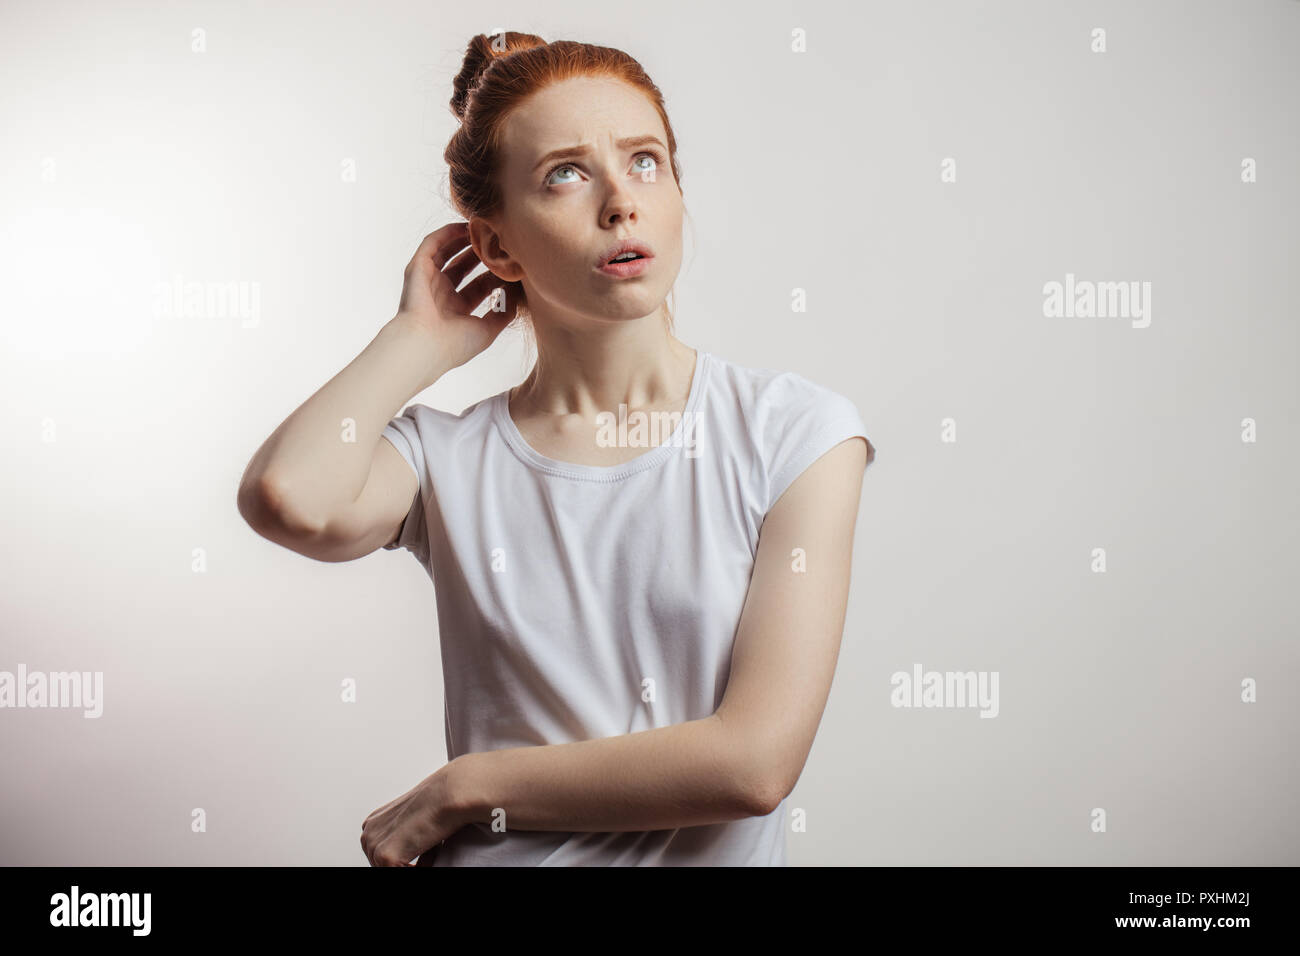 Redhaired woman with pensive expression isolé sur fond blanc. Banque D'Images